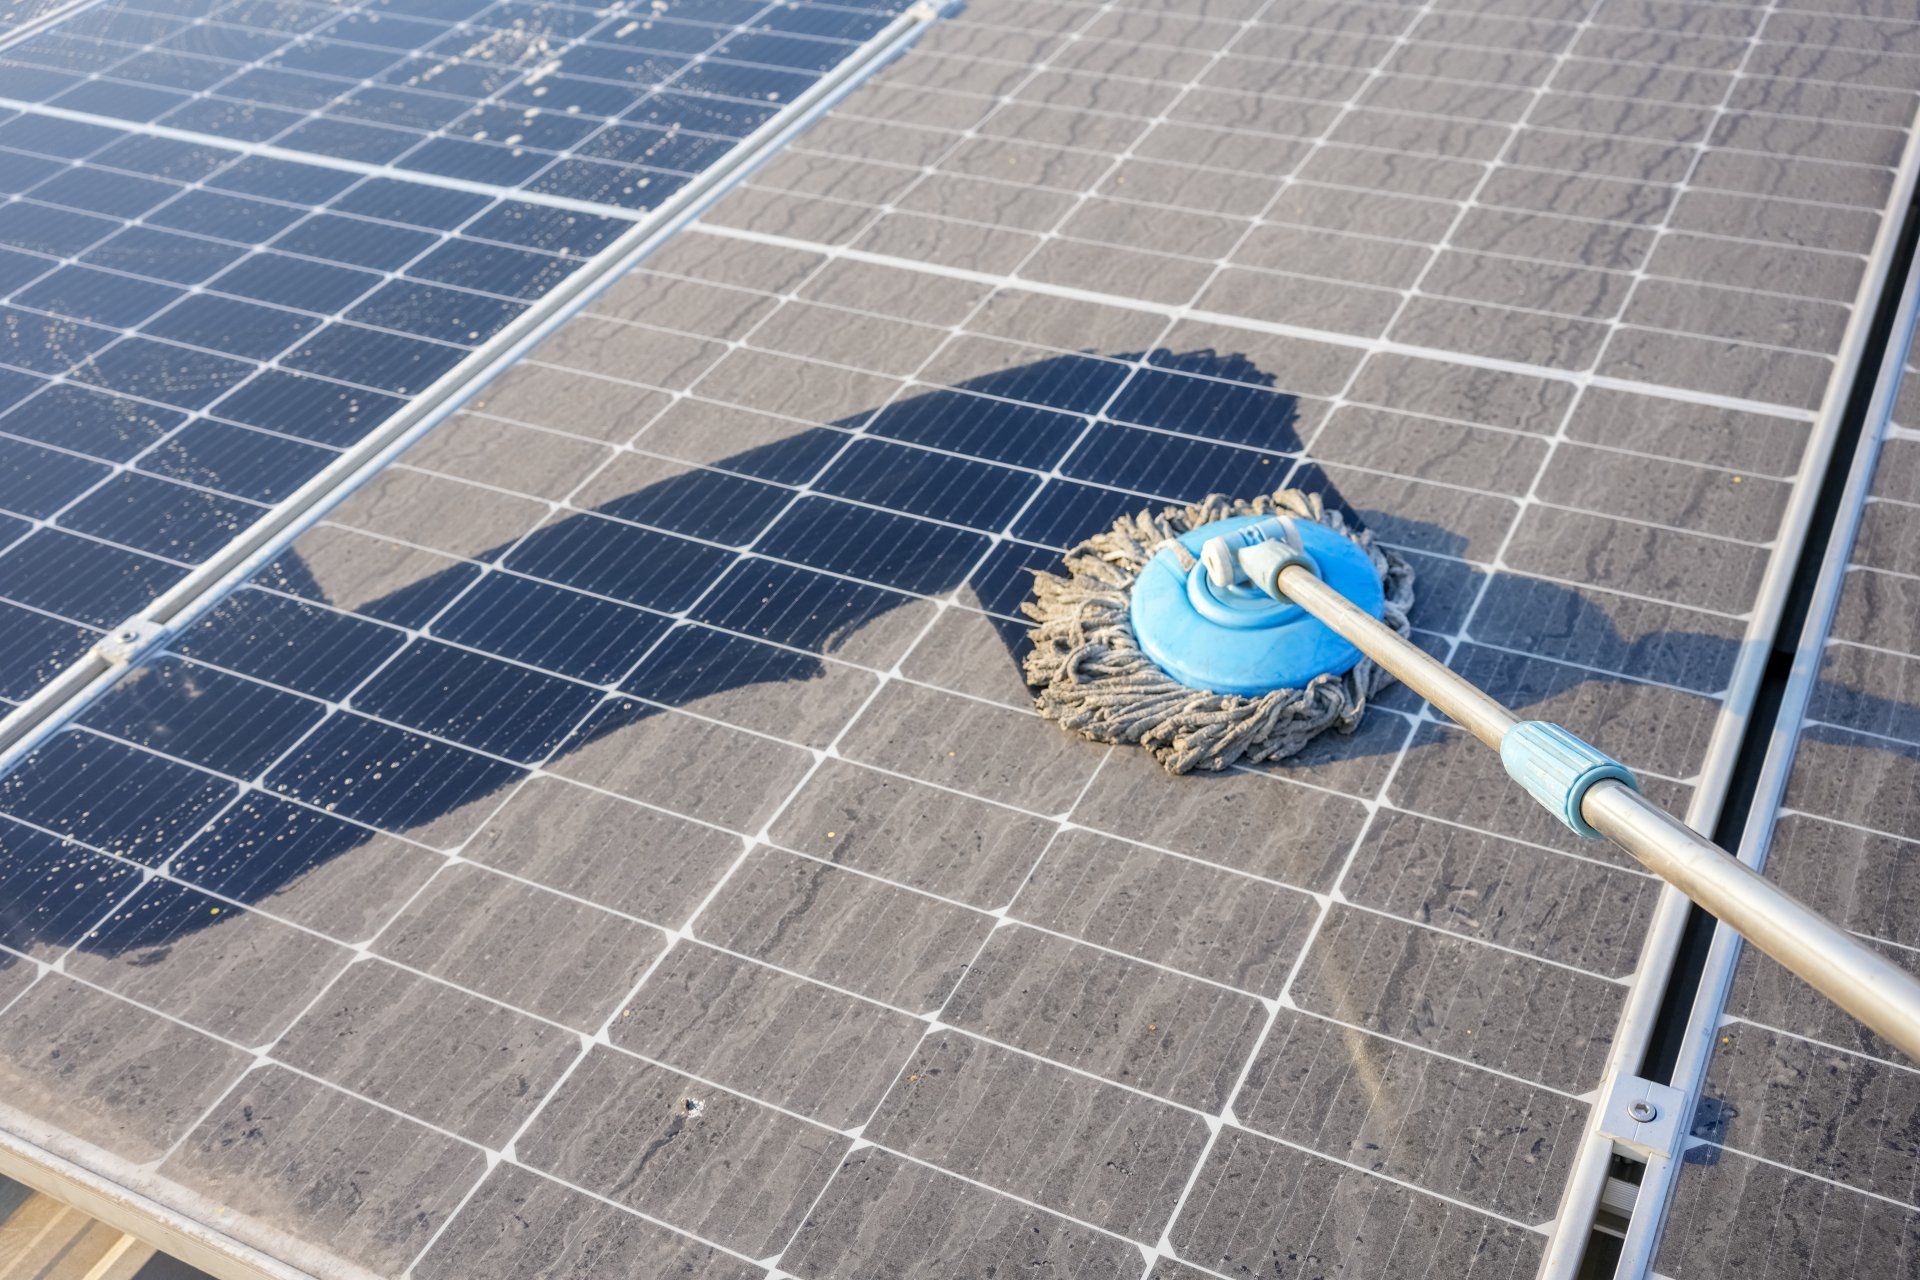 wiping solar panel with a mop